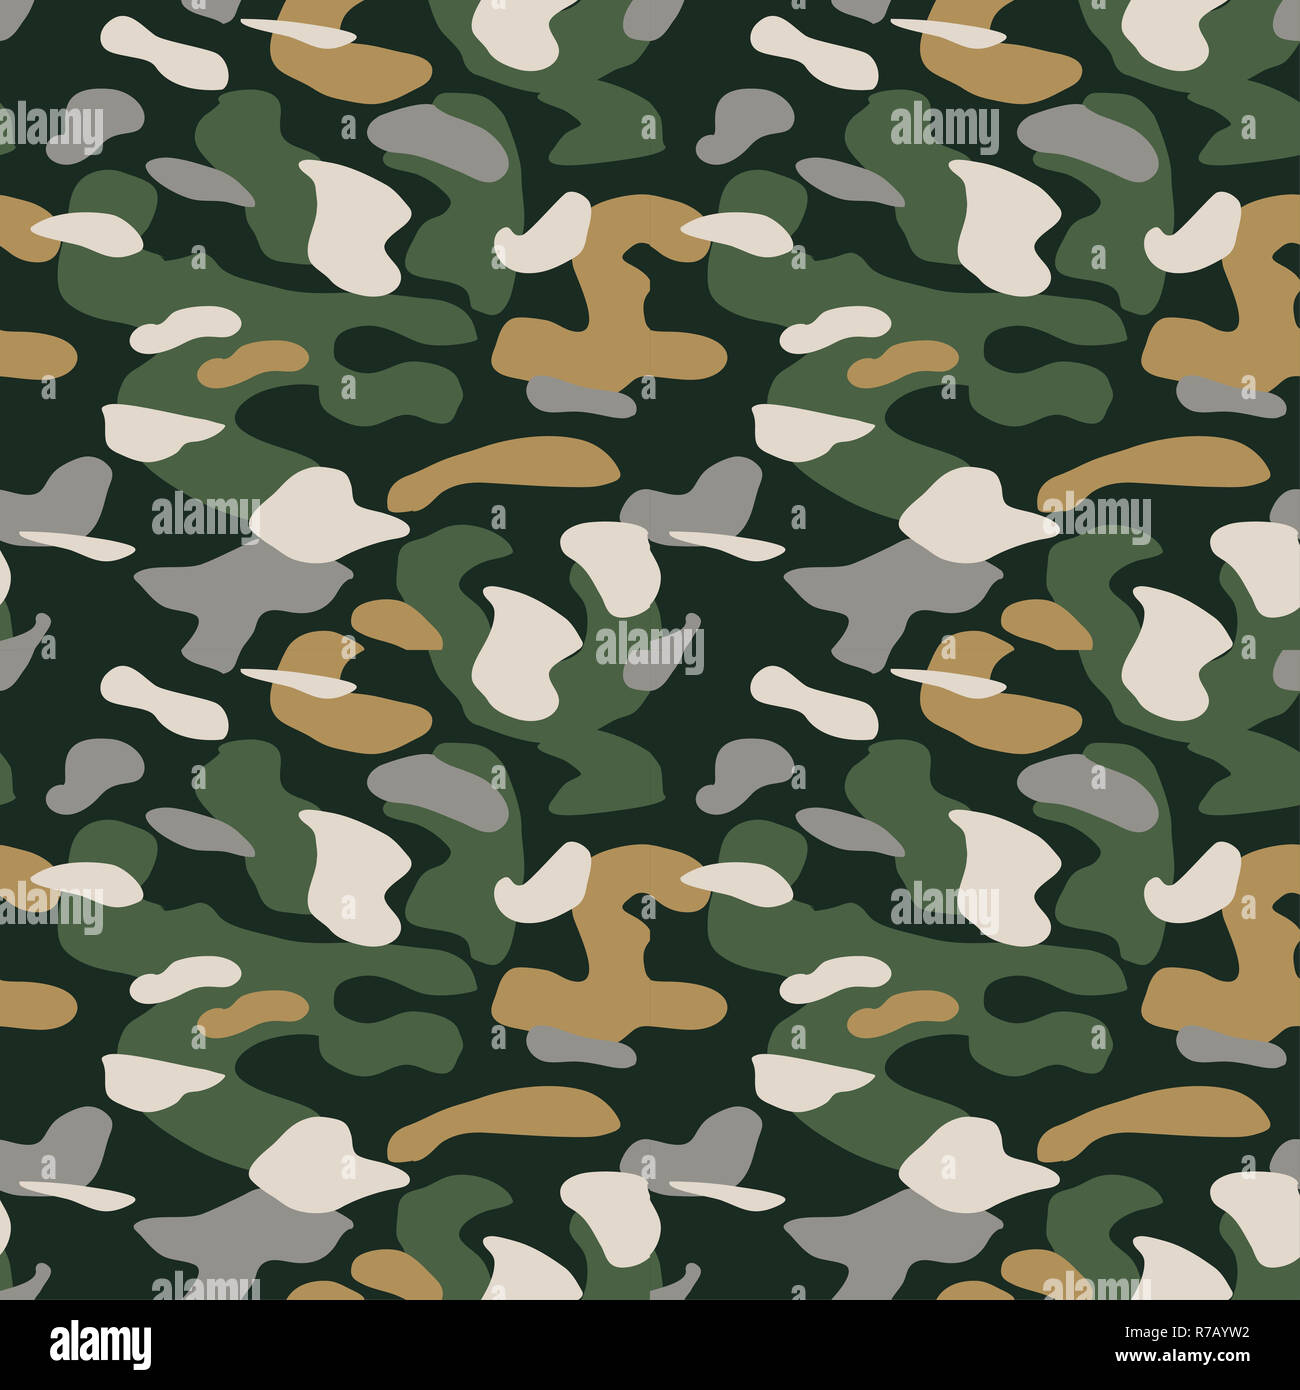 Camo Repeating Seamless Pattern